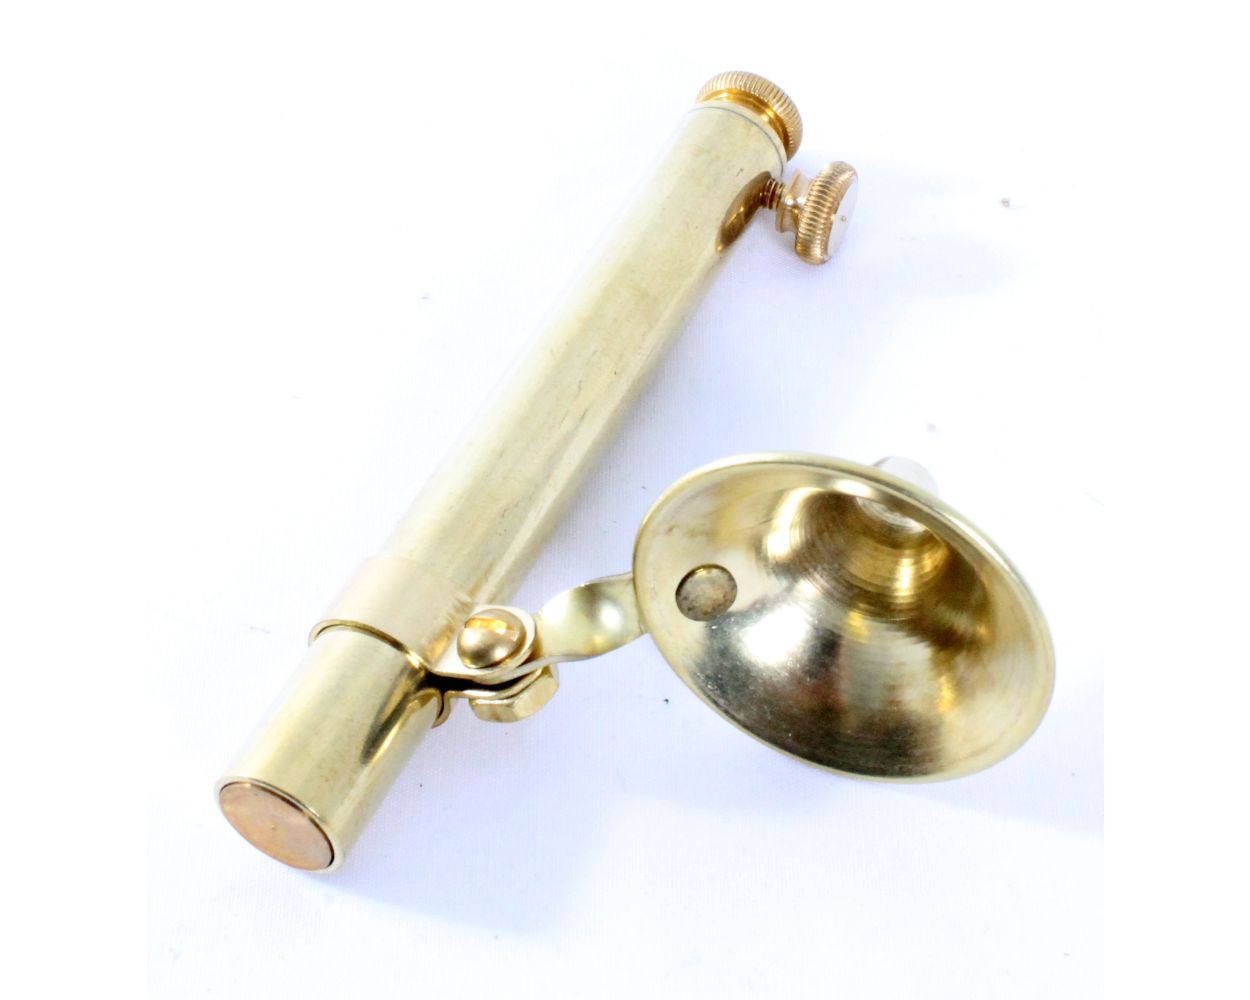 Treso Solid Brass Deluxe with Funnel Powder Measure 0-120 grains USA #1103120-02 